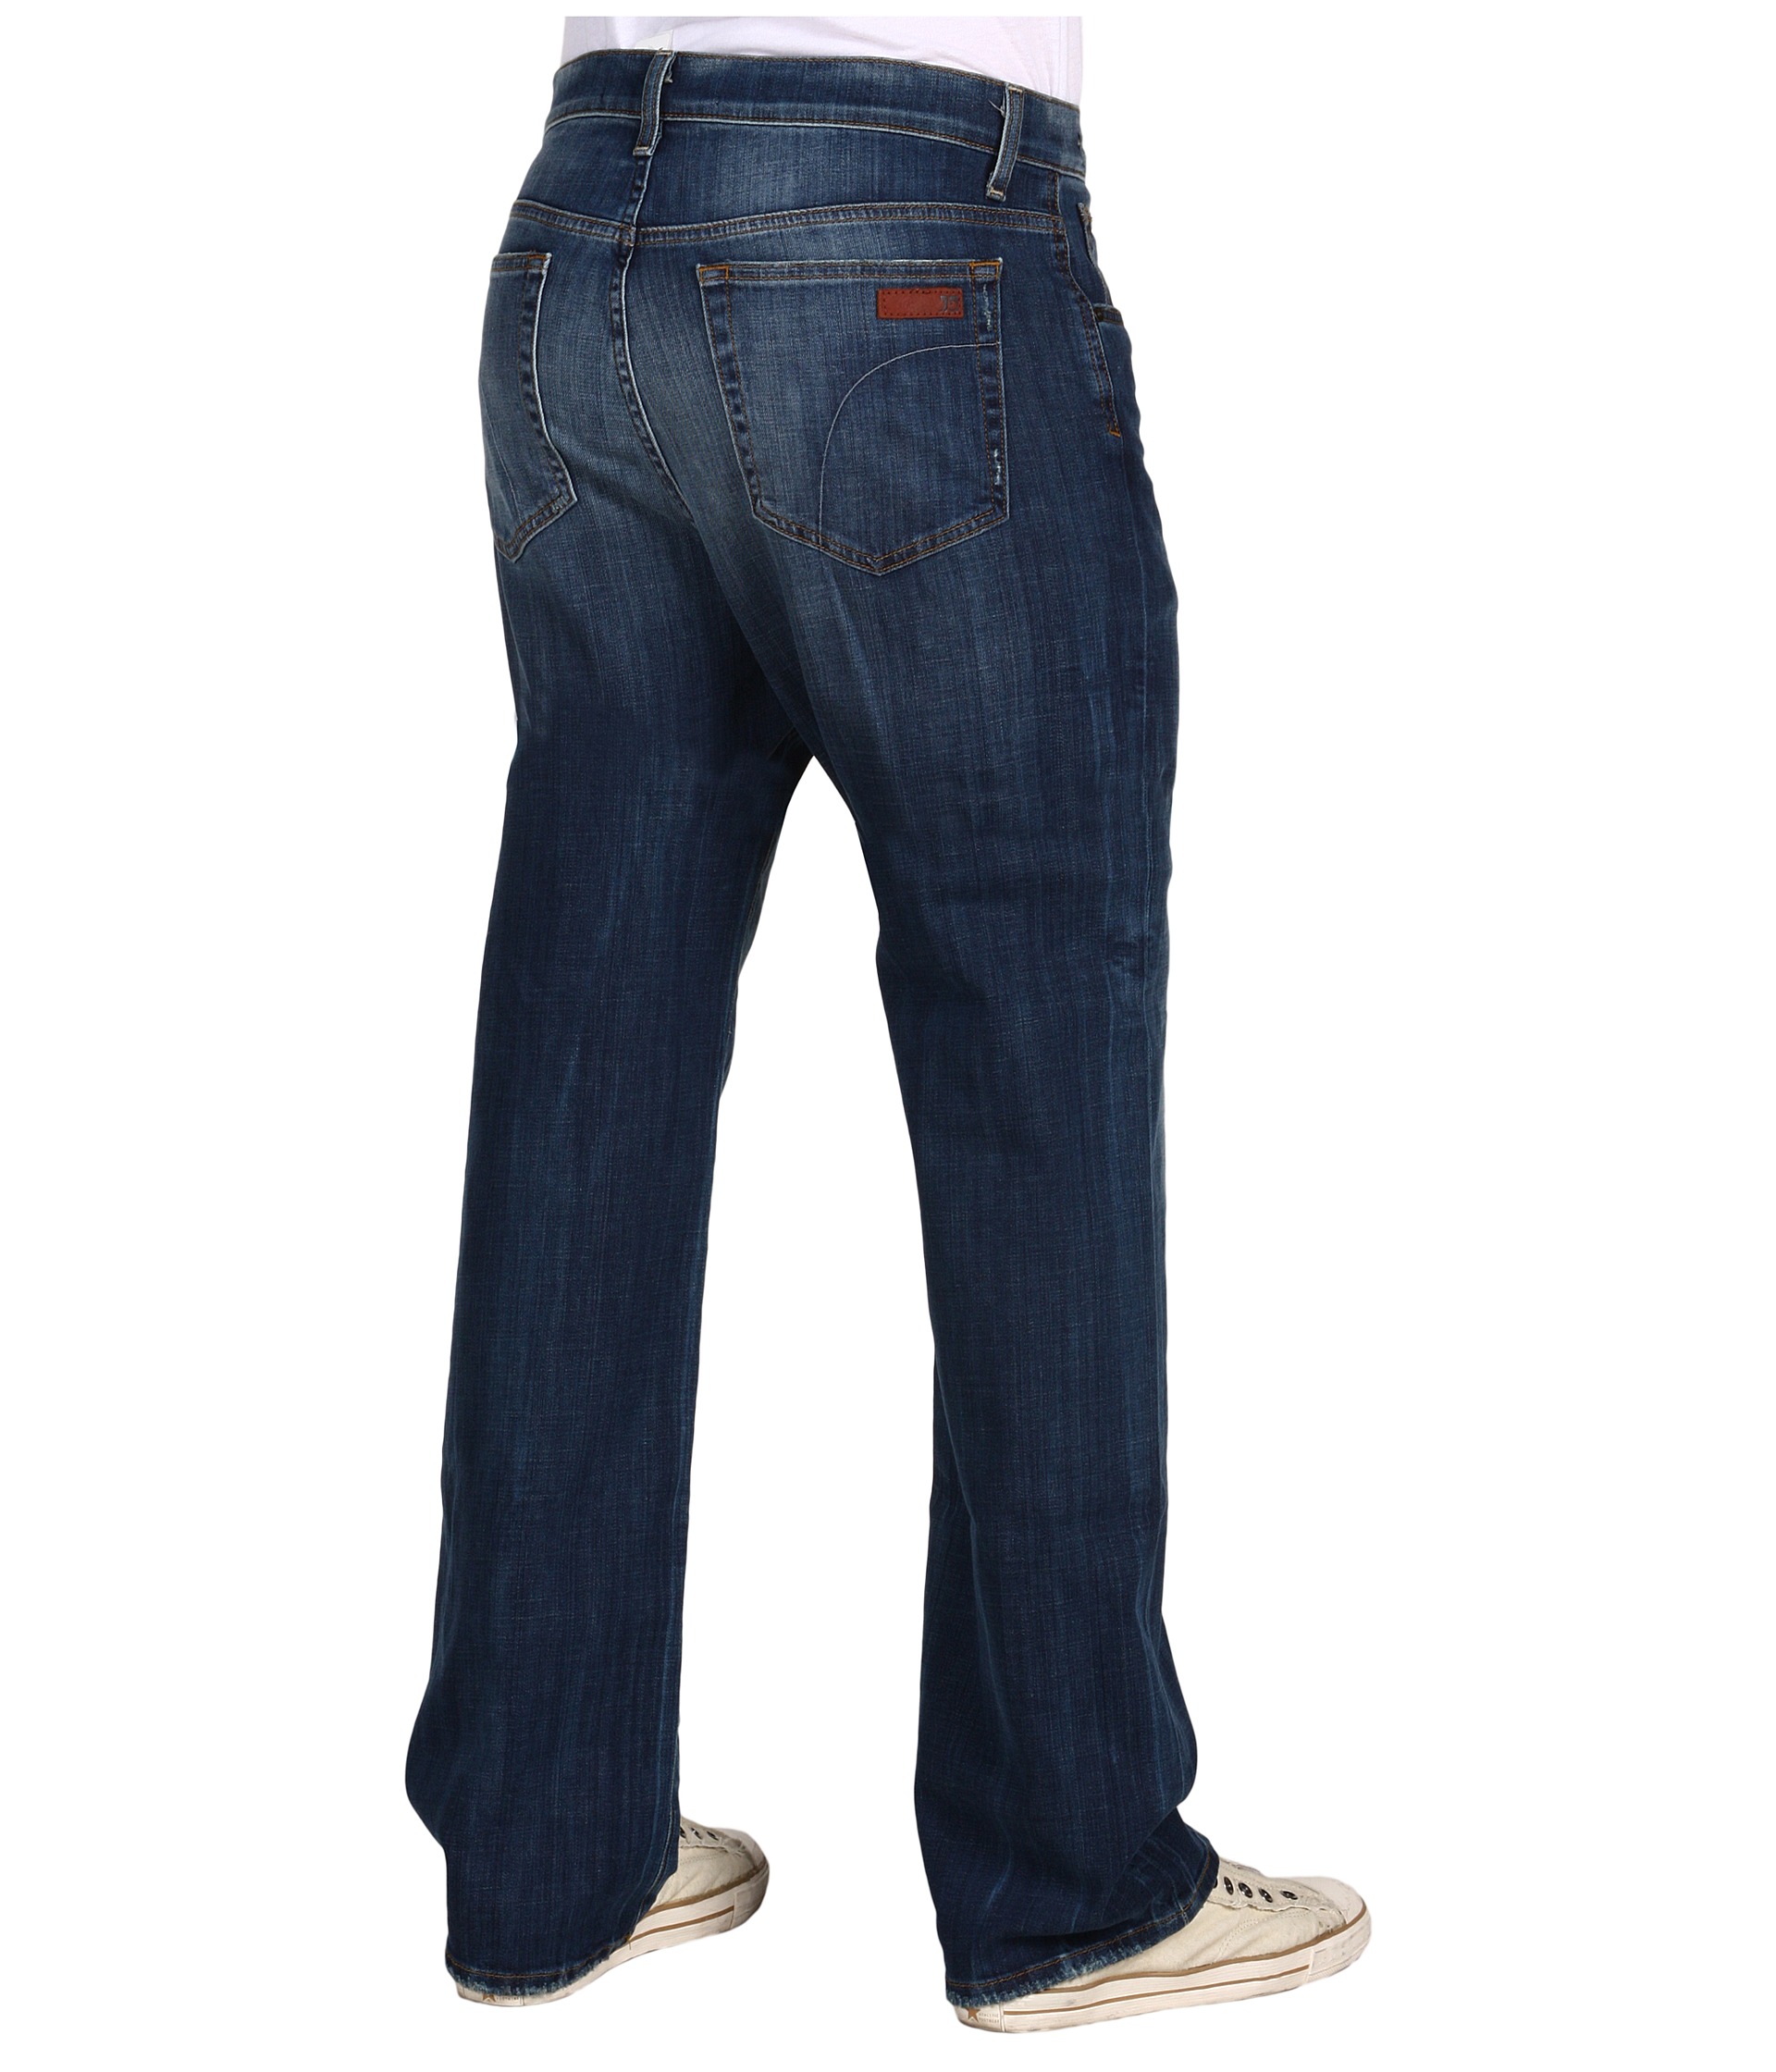 Joes Jeans Rebel Relaxed Fit 37 Inseam in Miller